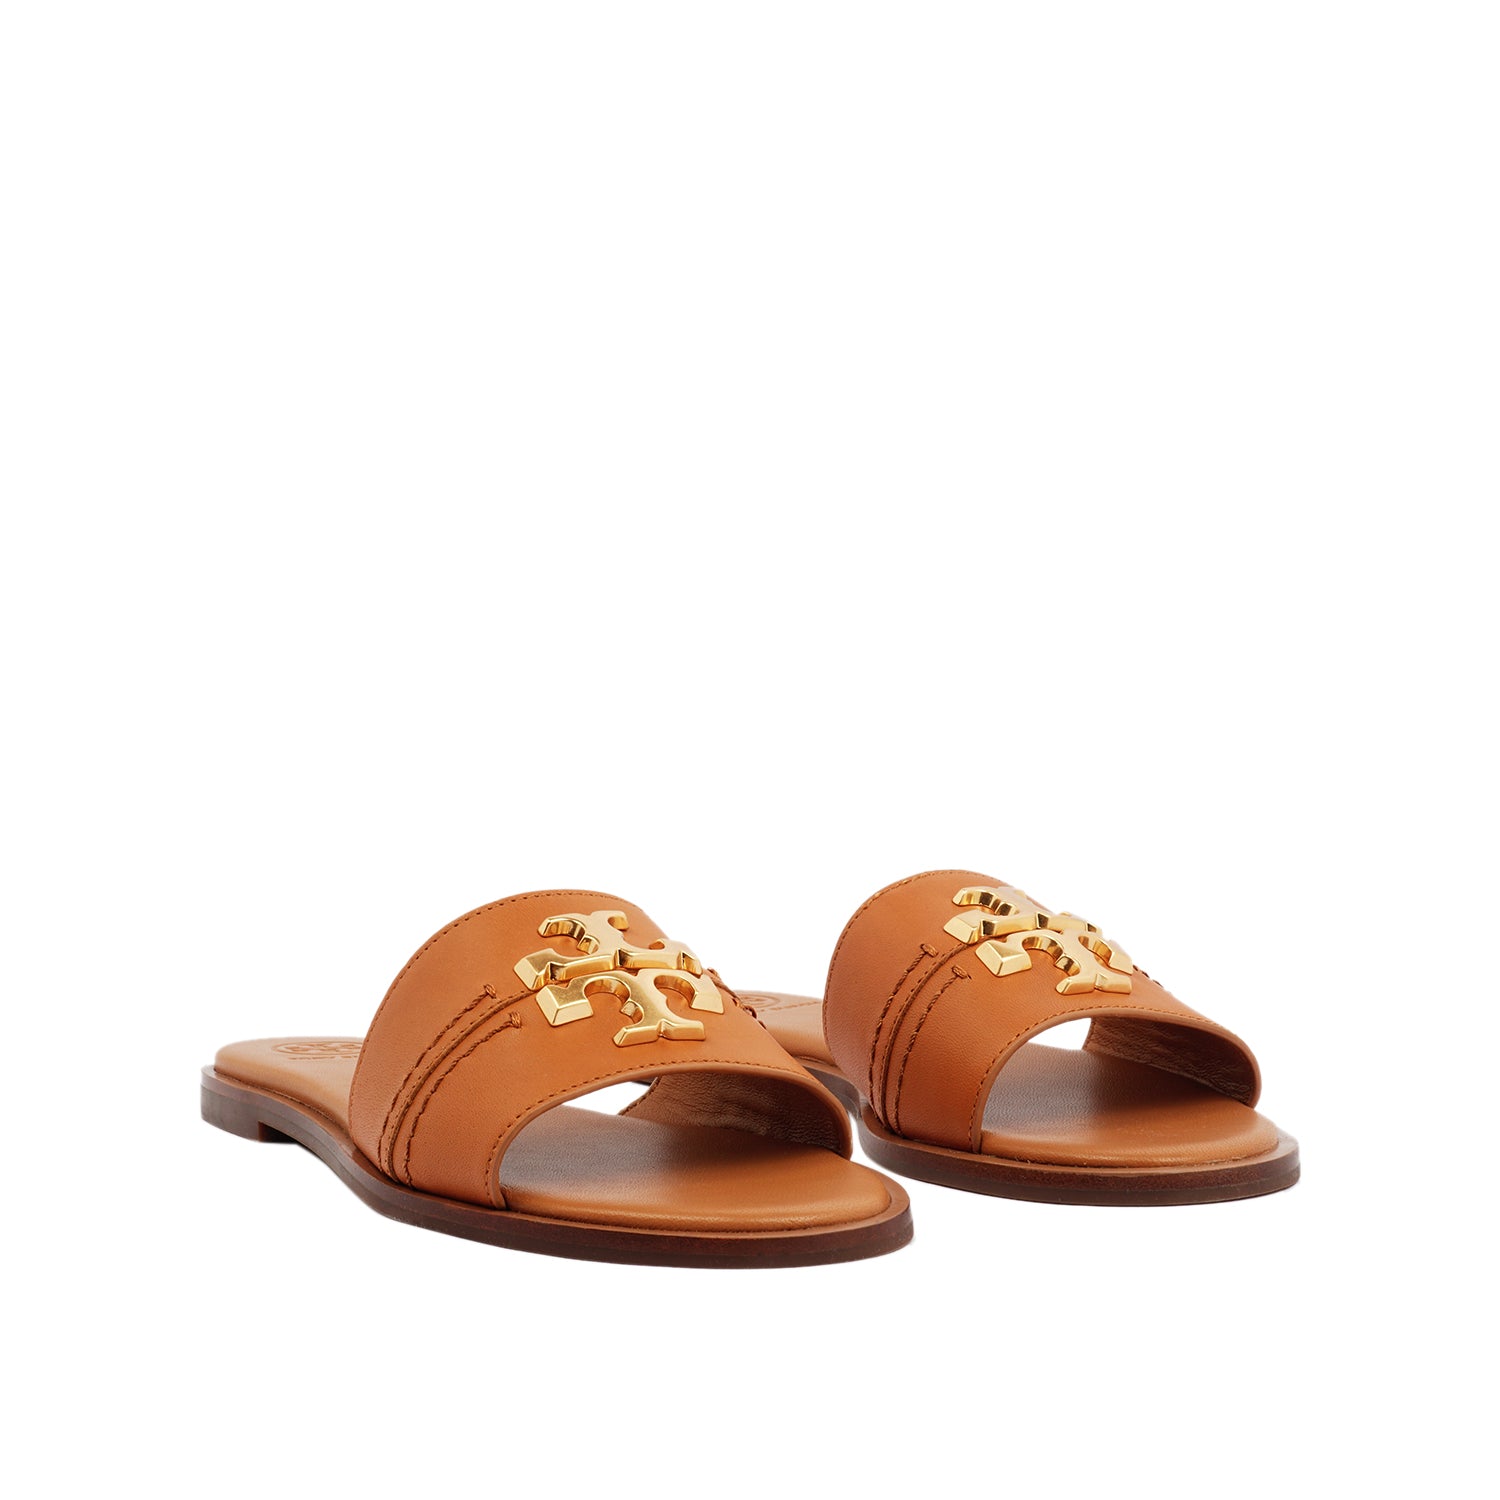 TORY BURCH EVERLY SLIDE IN BROWN